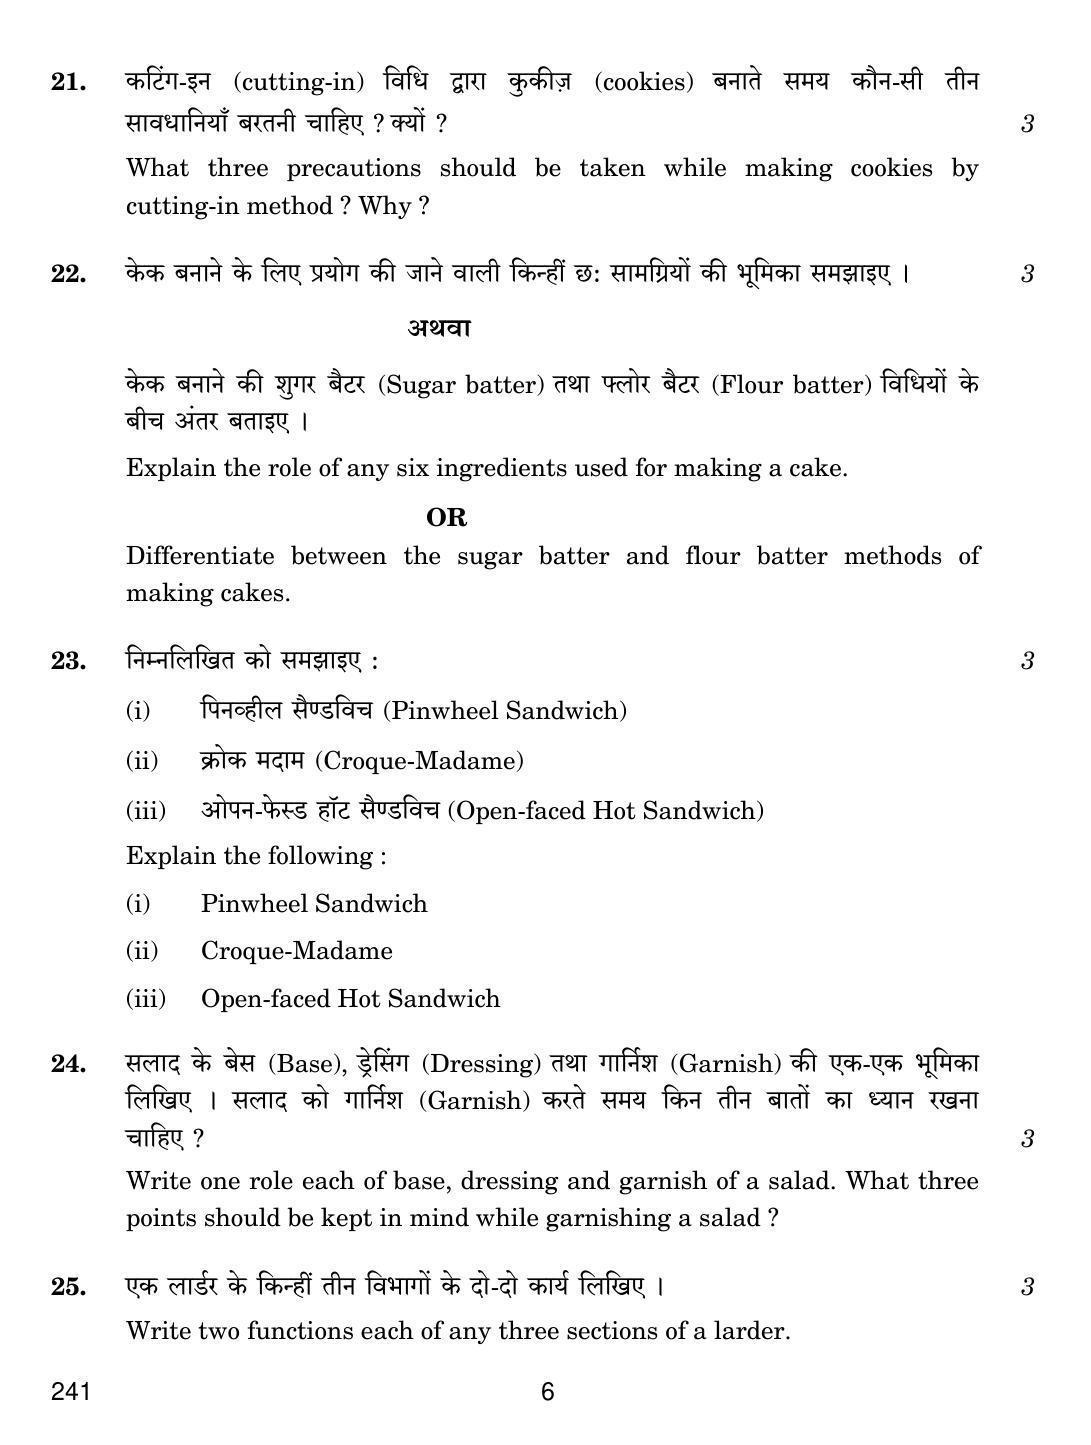 CBSE Class 12 241 FOOD PRODUCTION III 2018 Question Paper - Page 6